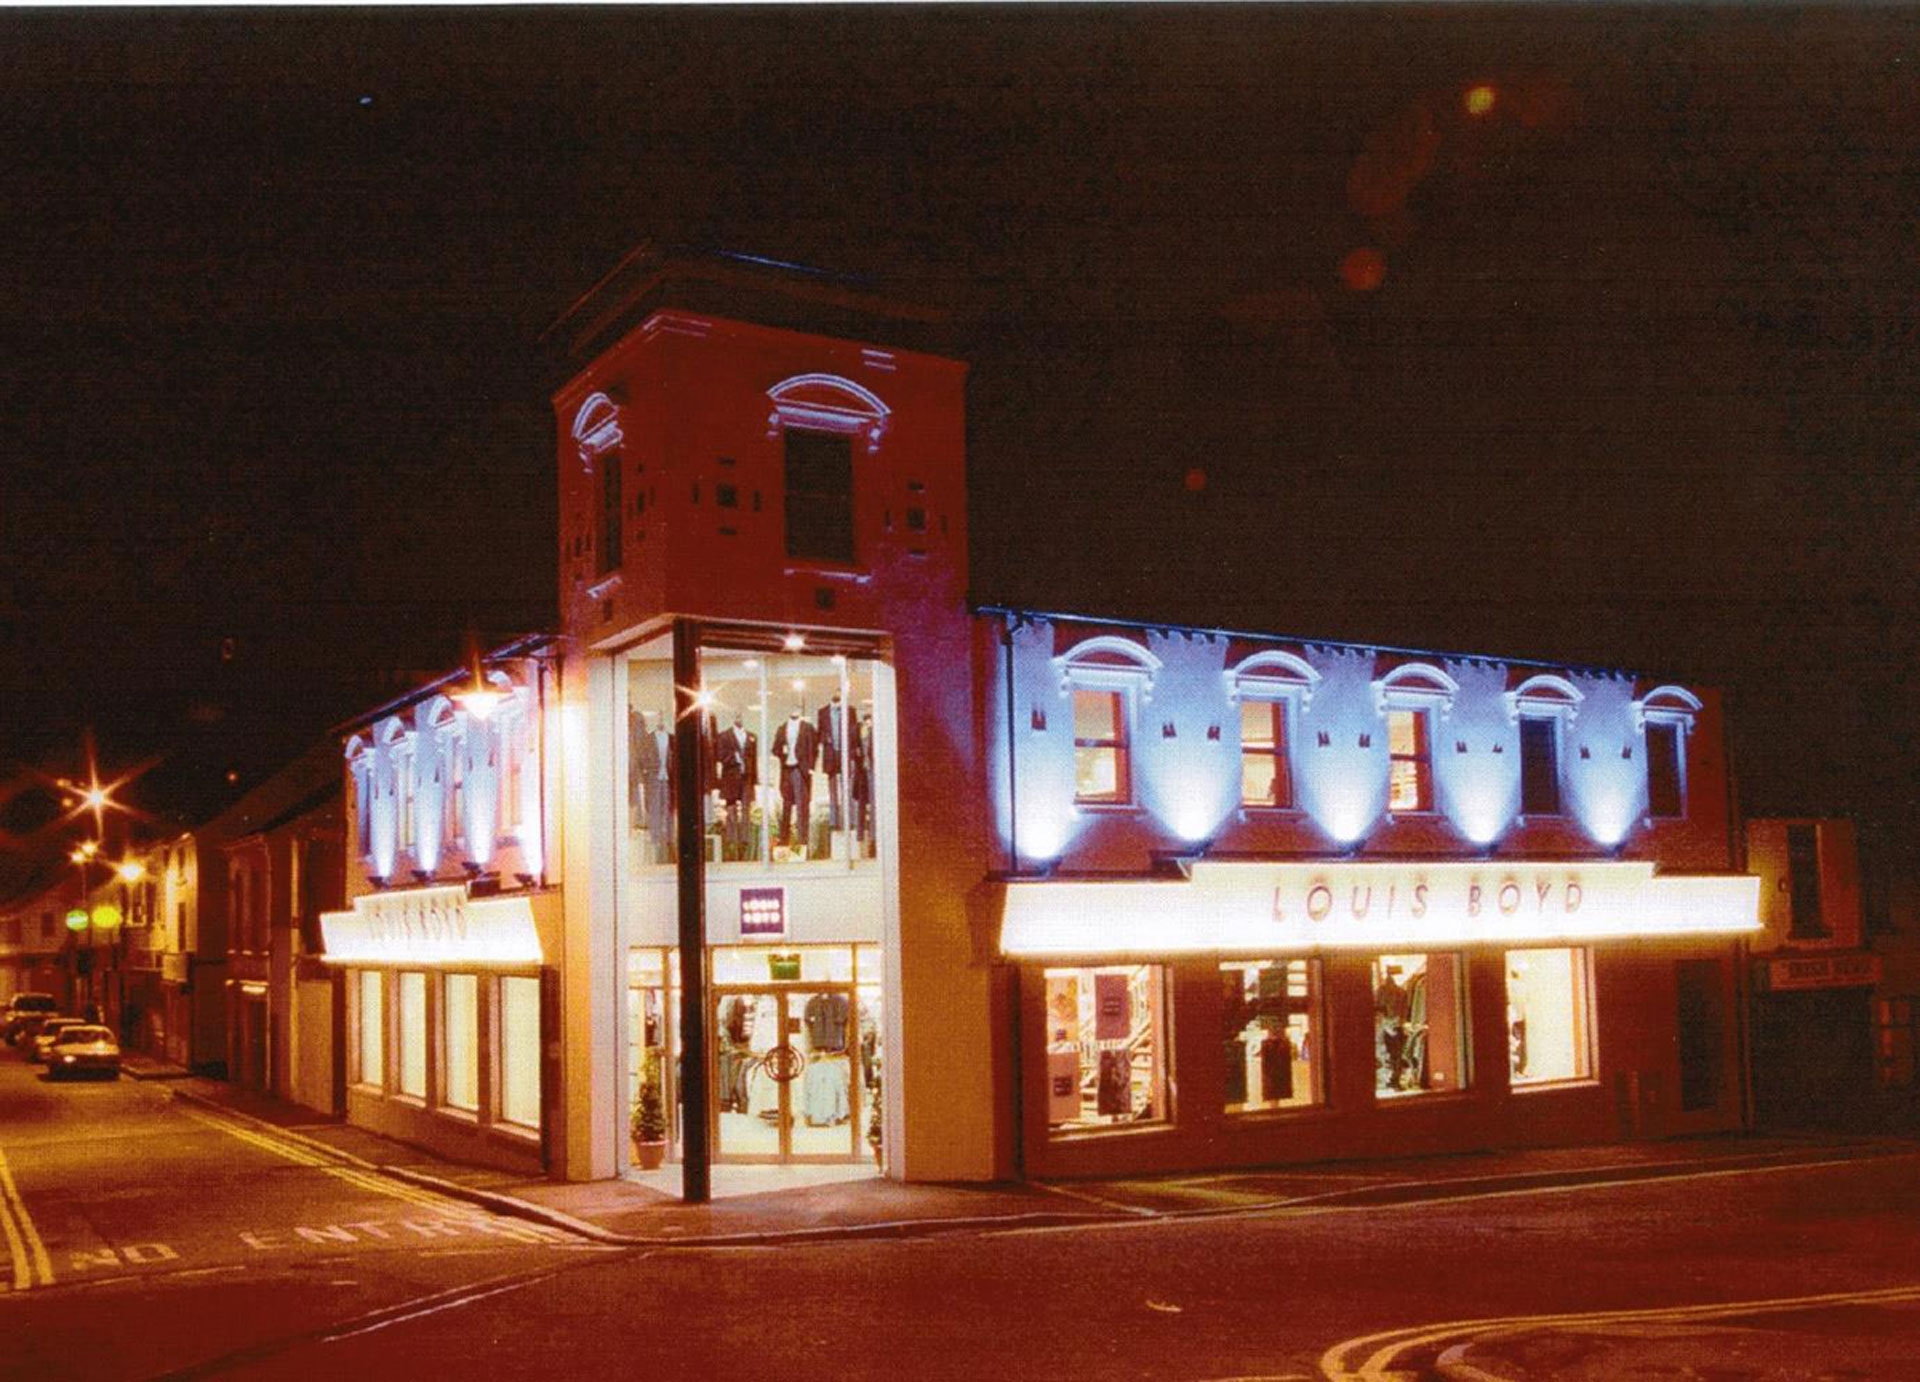 a 25 year old photograph of the Louis Boyd shop on the corner of two roads.